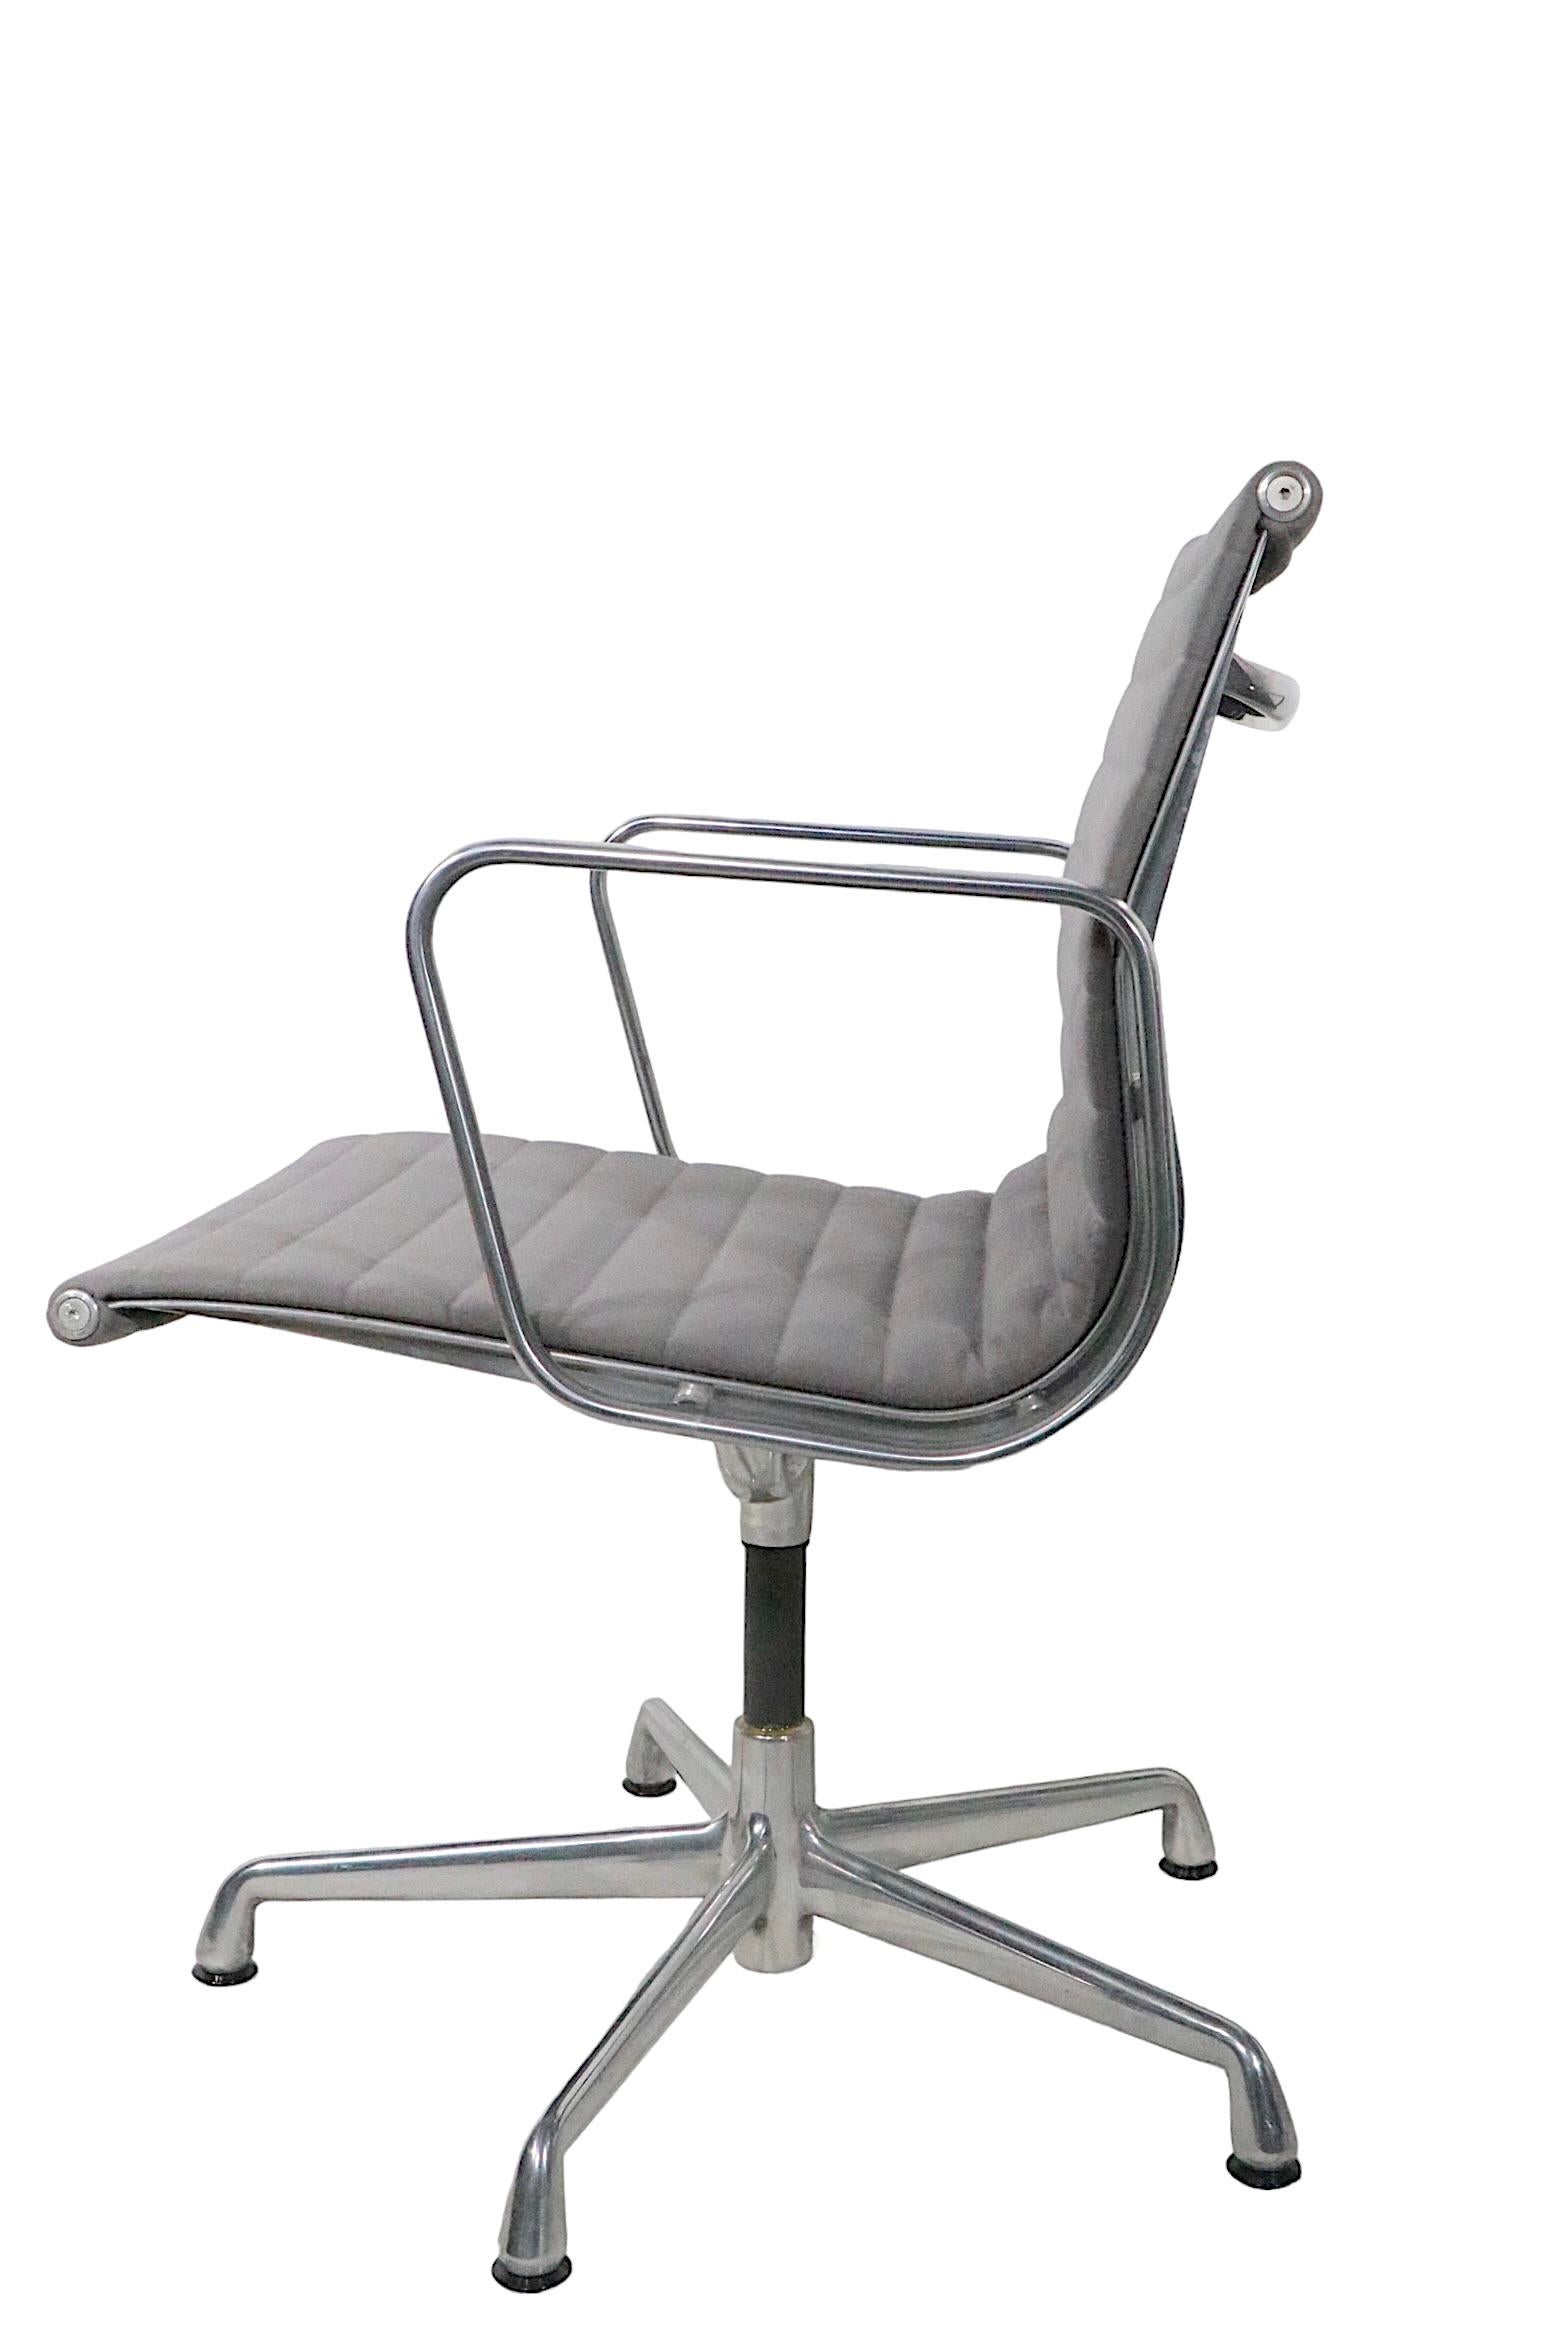 Eames Management Chairs in Grey Fabric Upholstery c. 1980 - 1990s 4 Available  In Good Condition For Sale In New York, NY